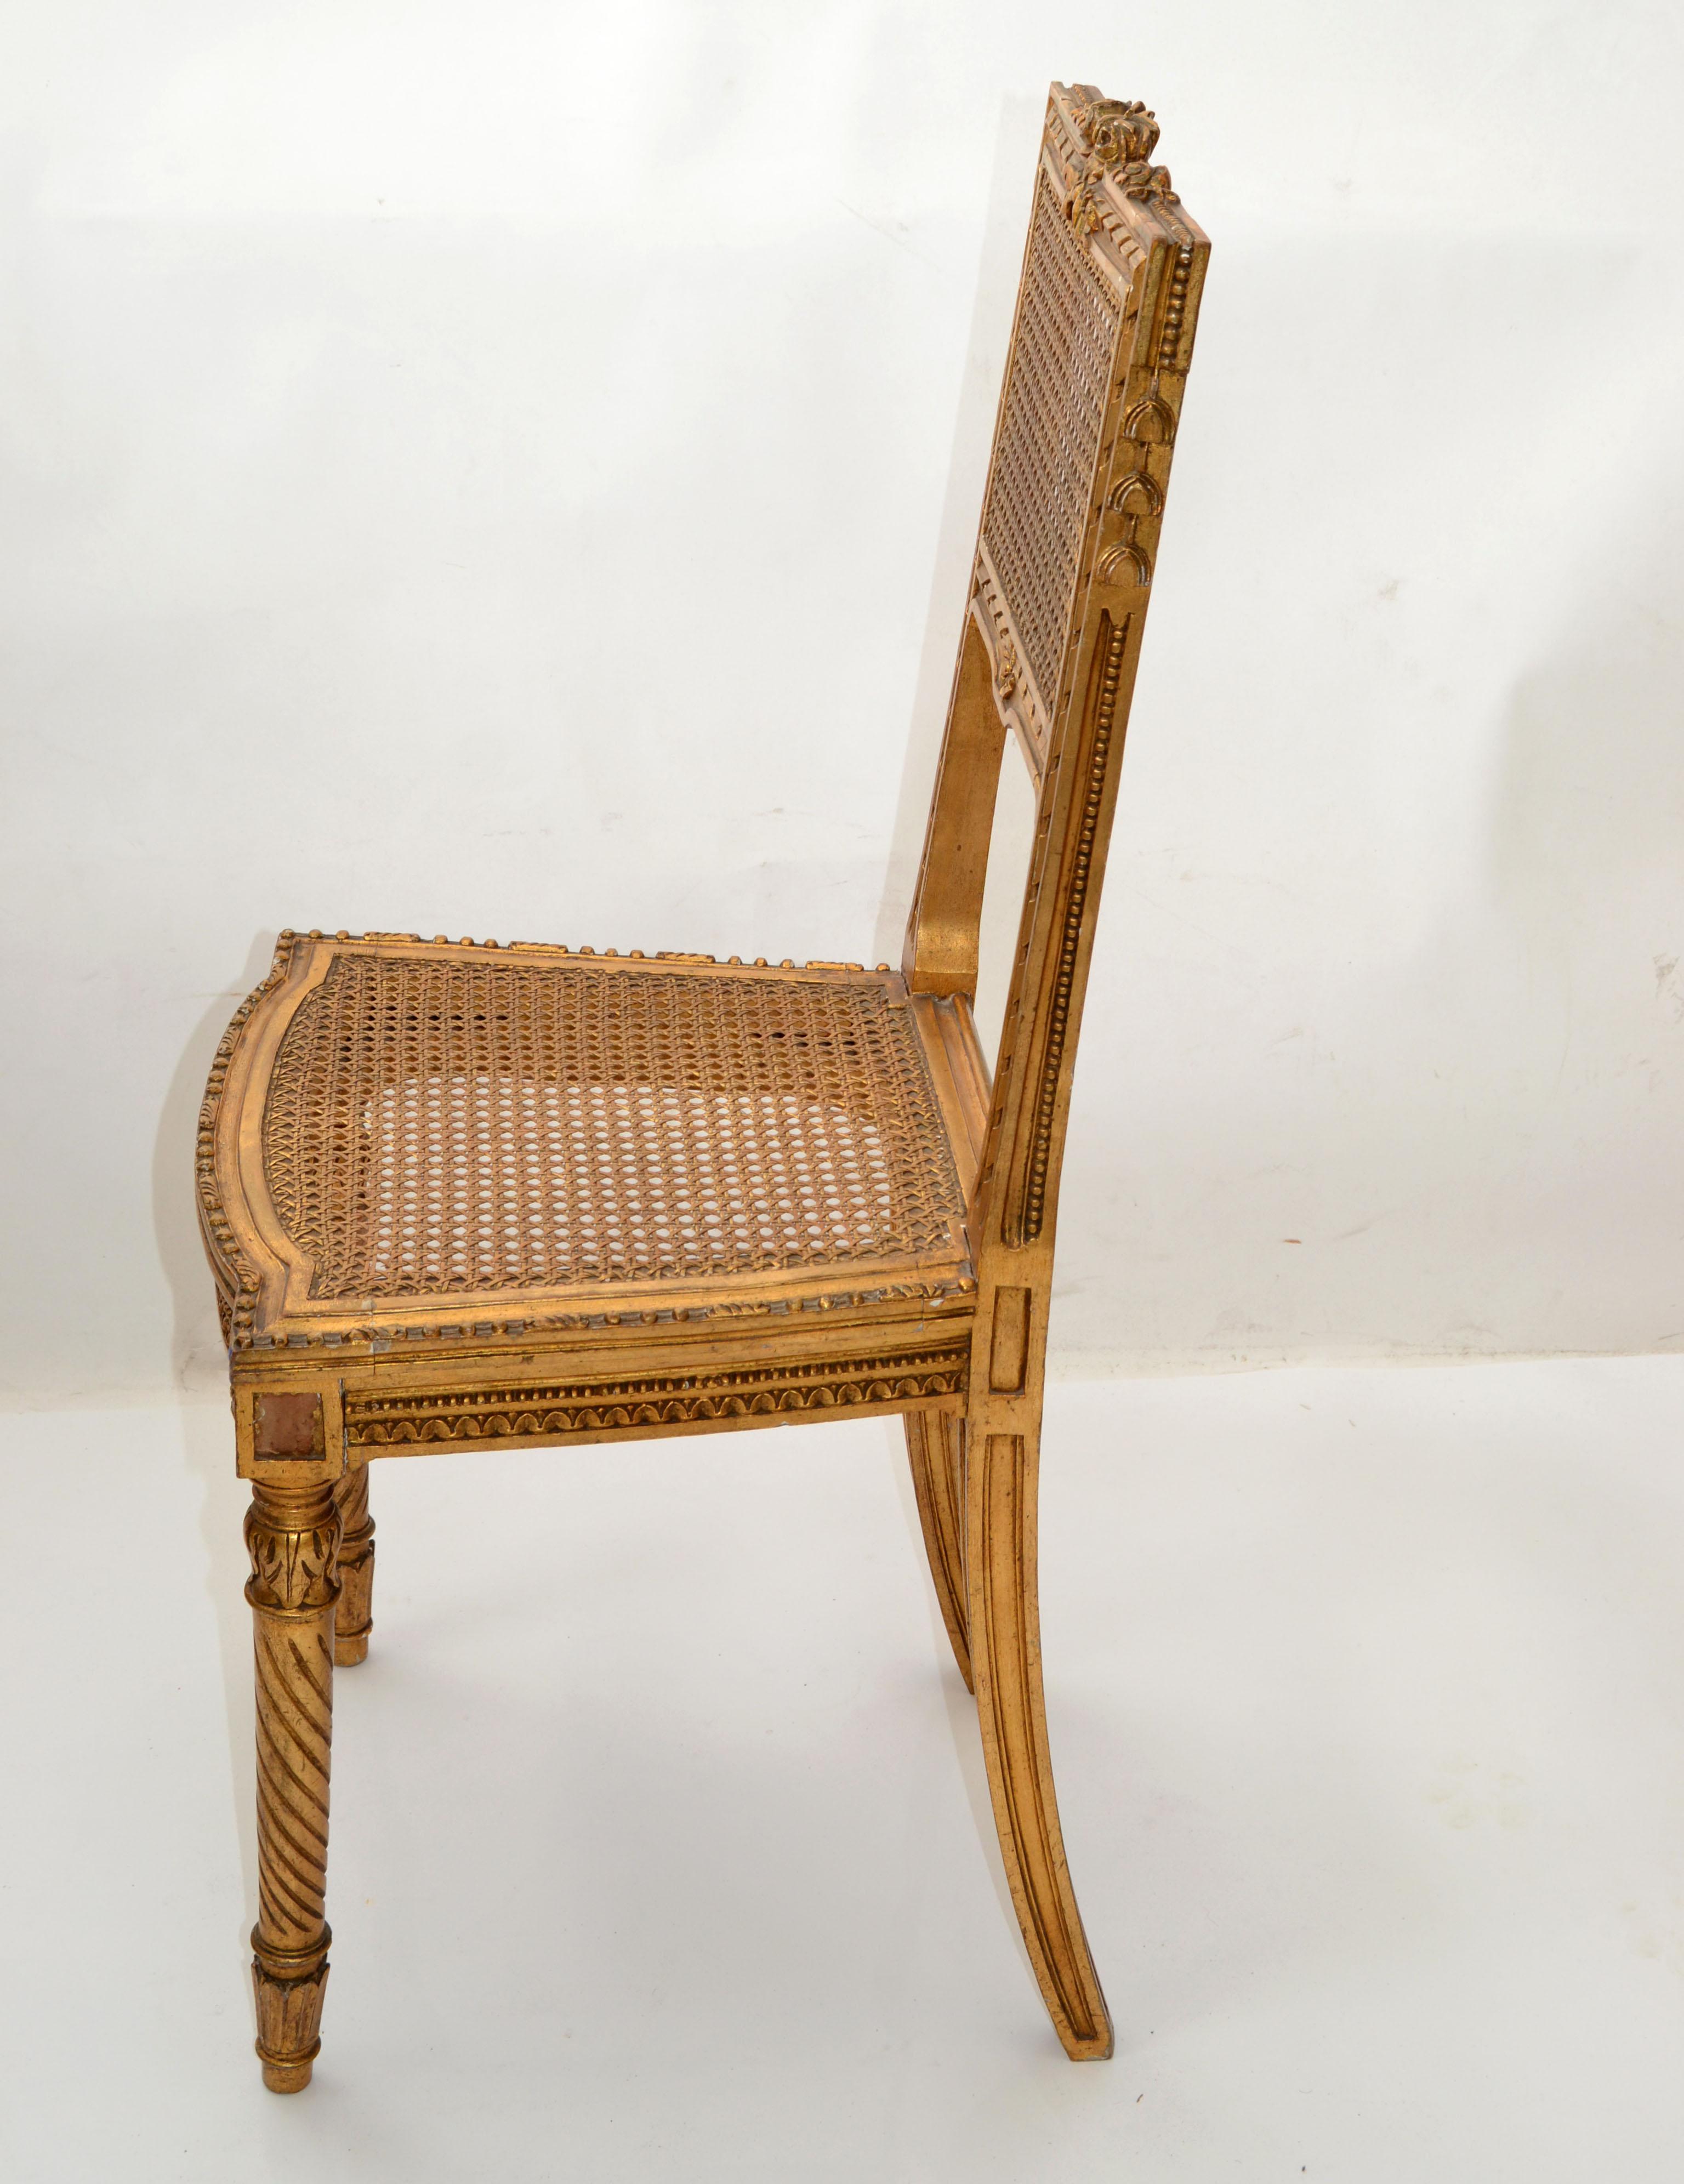 We offer a hand-carved and hand-woven Vanity chair, side chair in gilt wood with turned front legs and carved back legs, handwoven cane seat, backrest and Roses, Ribbon carvings.
Ready to use with some wear to the gilt paint due to History.
  